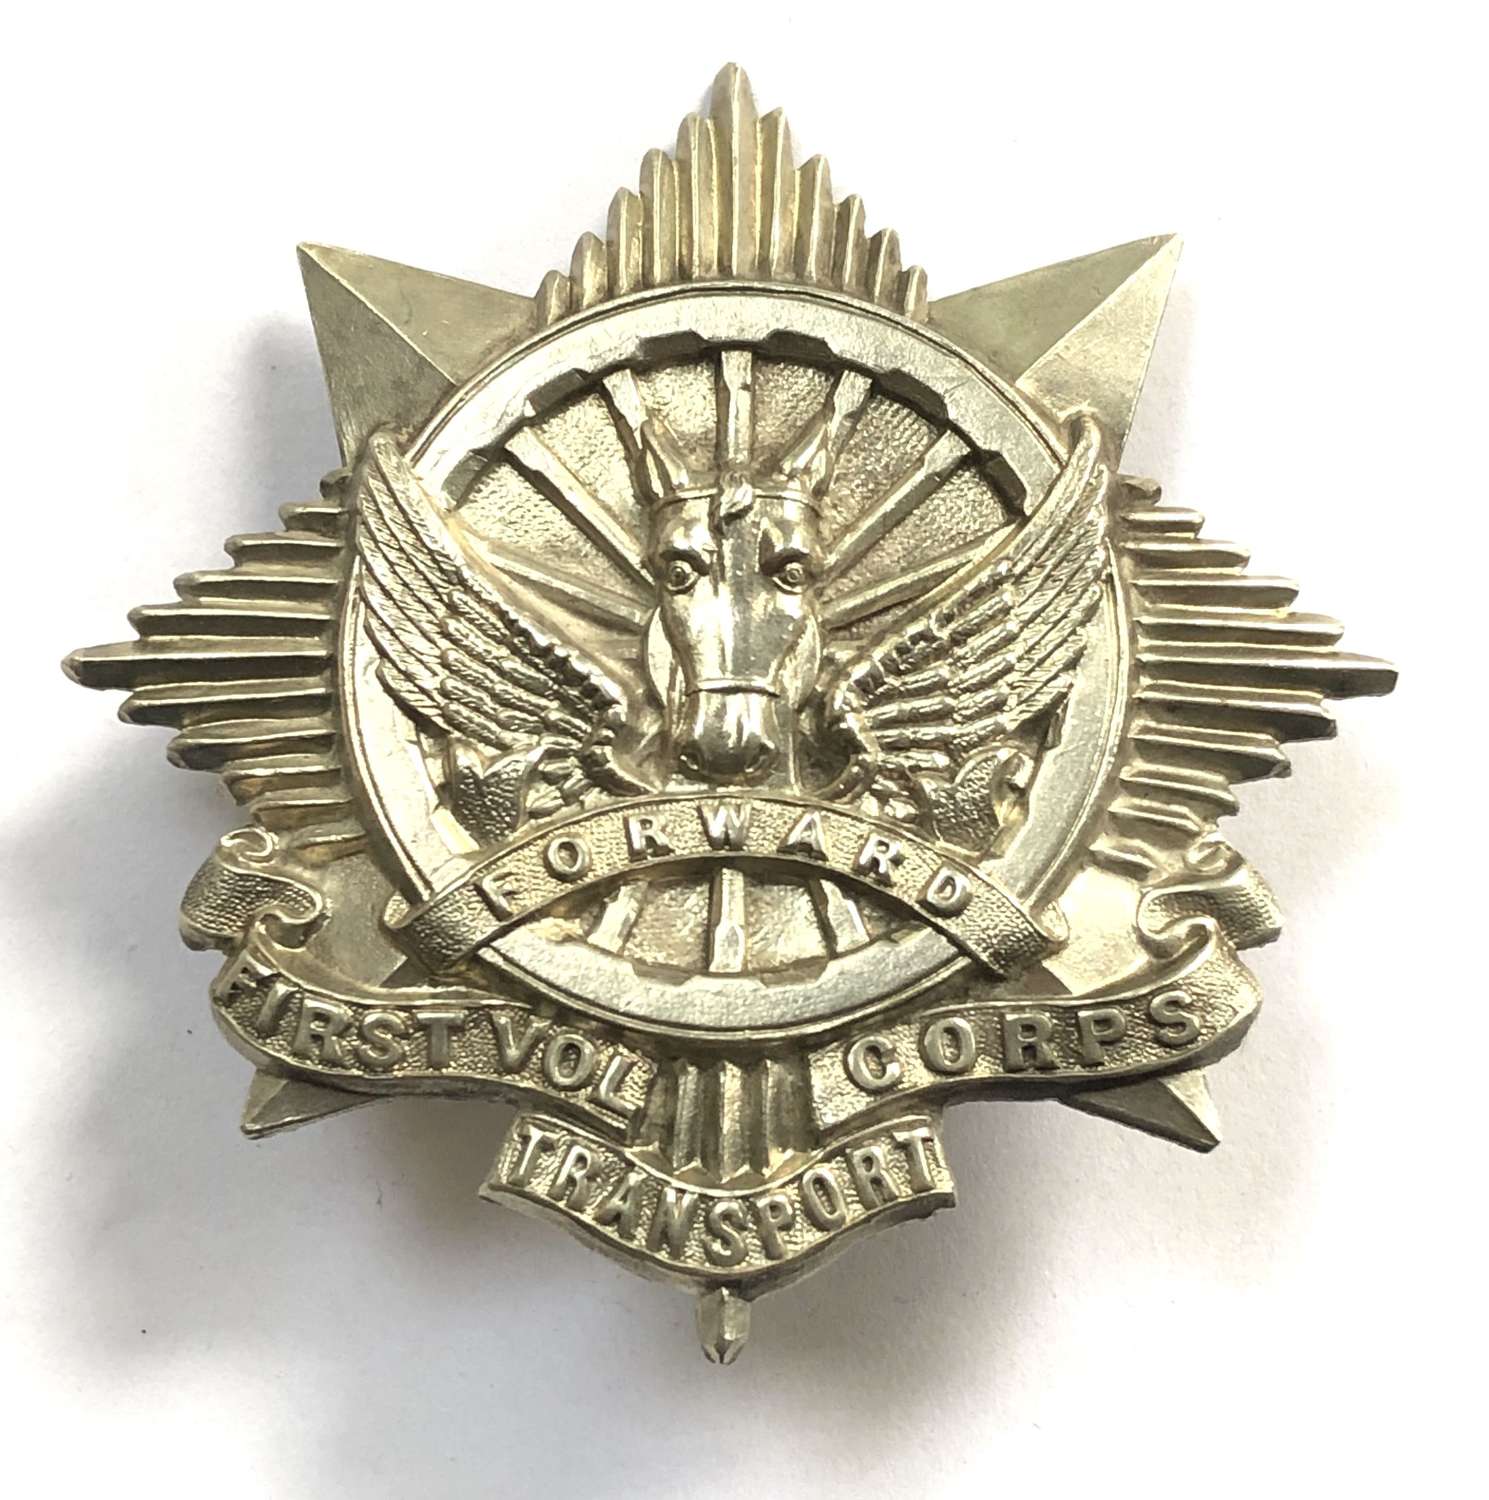 South Africa First Volunteer Transport  Corps cap badge C1902-13